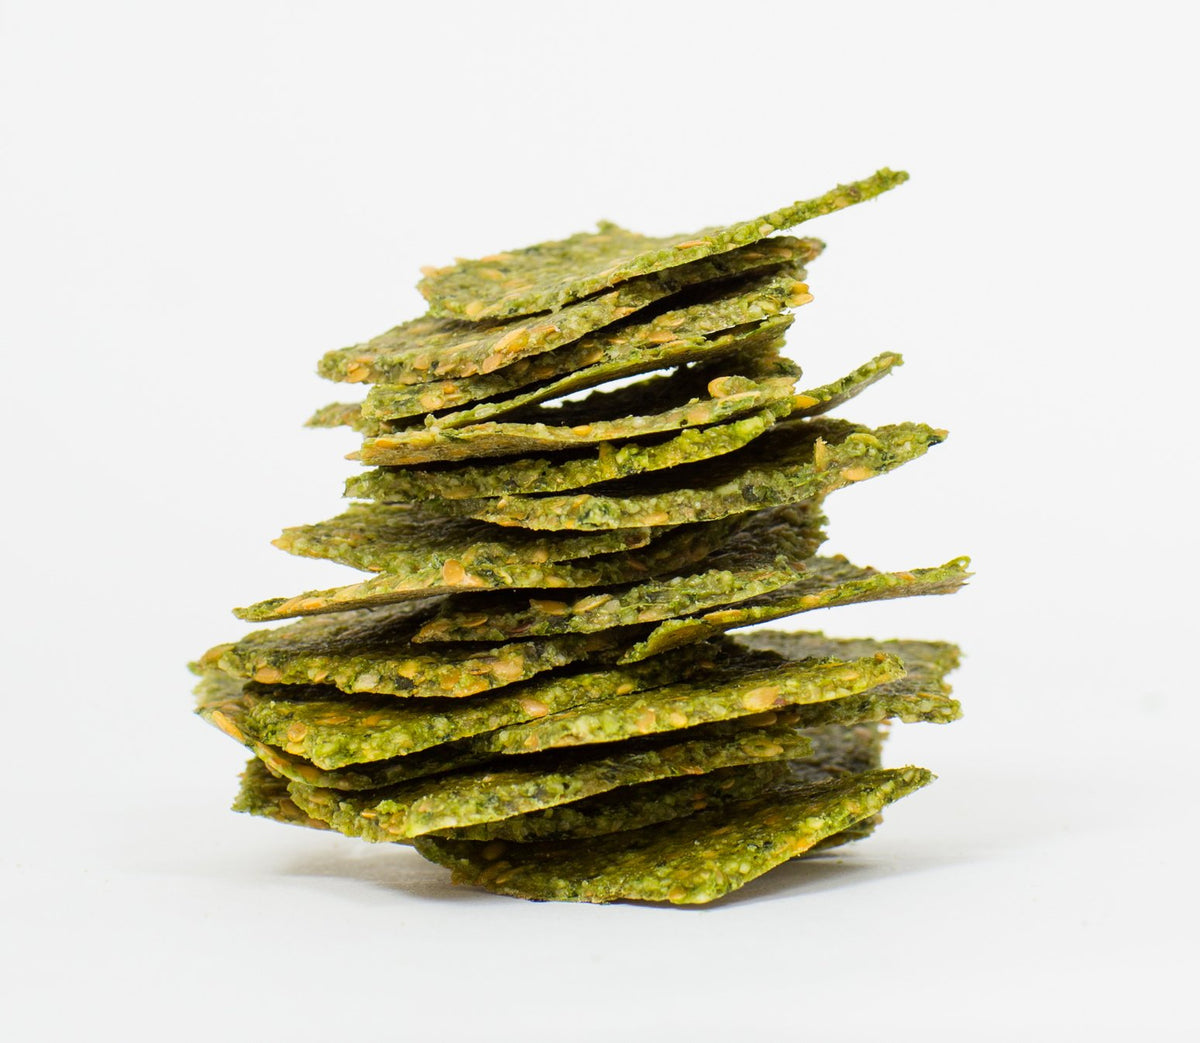 Raw Kale Cracker Snacks (35g) | 8 Foods | Raw Living UK | Eight Foods Raw Kale Cracker Snacks: Cheesy-Tasting, but totally Delicious Dairy-Free Kale Crackers. A Healthy Gluten, Wheat &amp; Refined Sugar-Free Keto Snack.